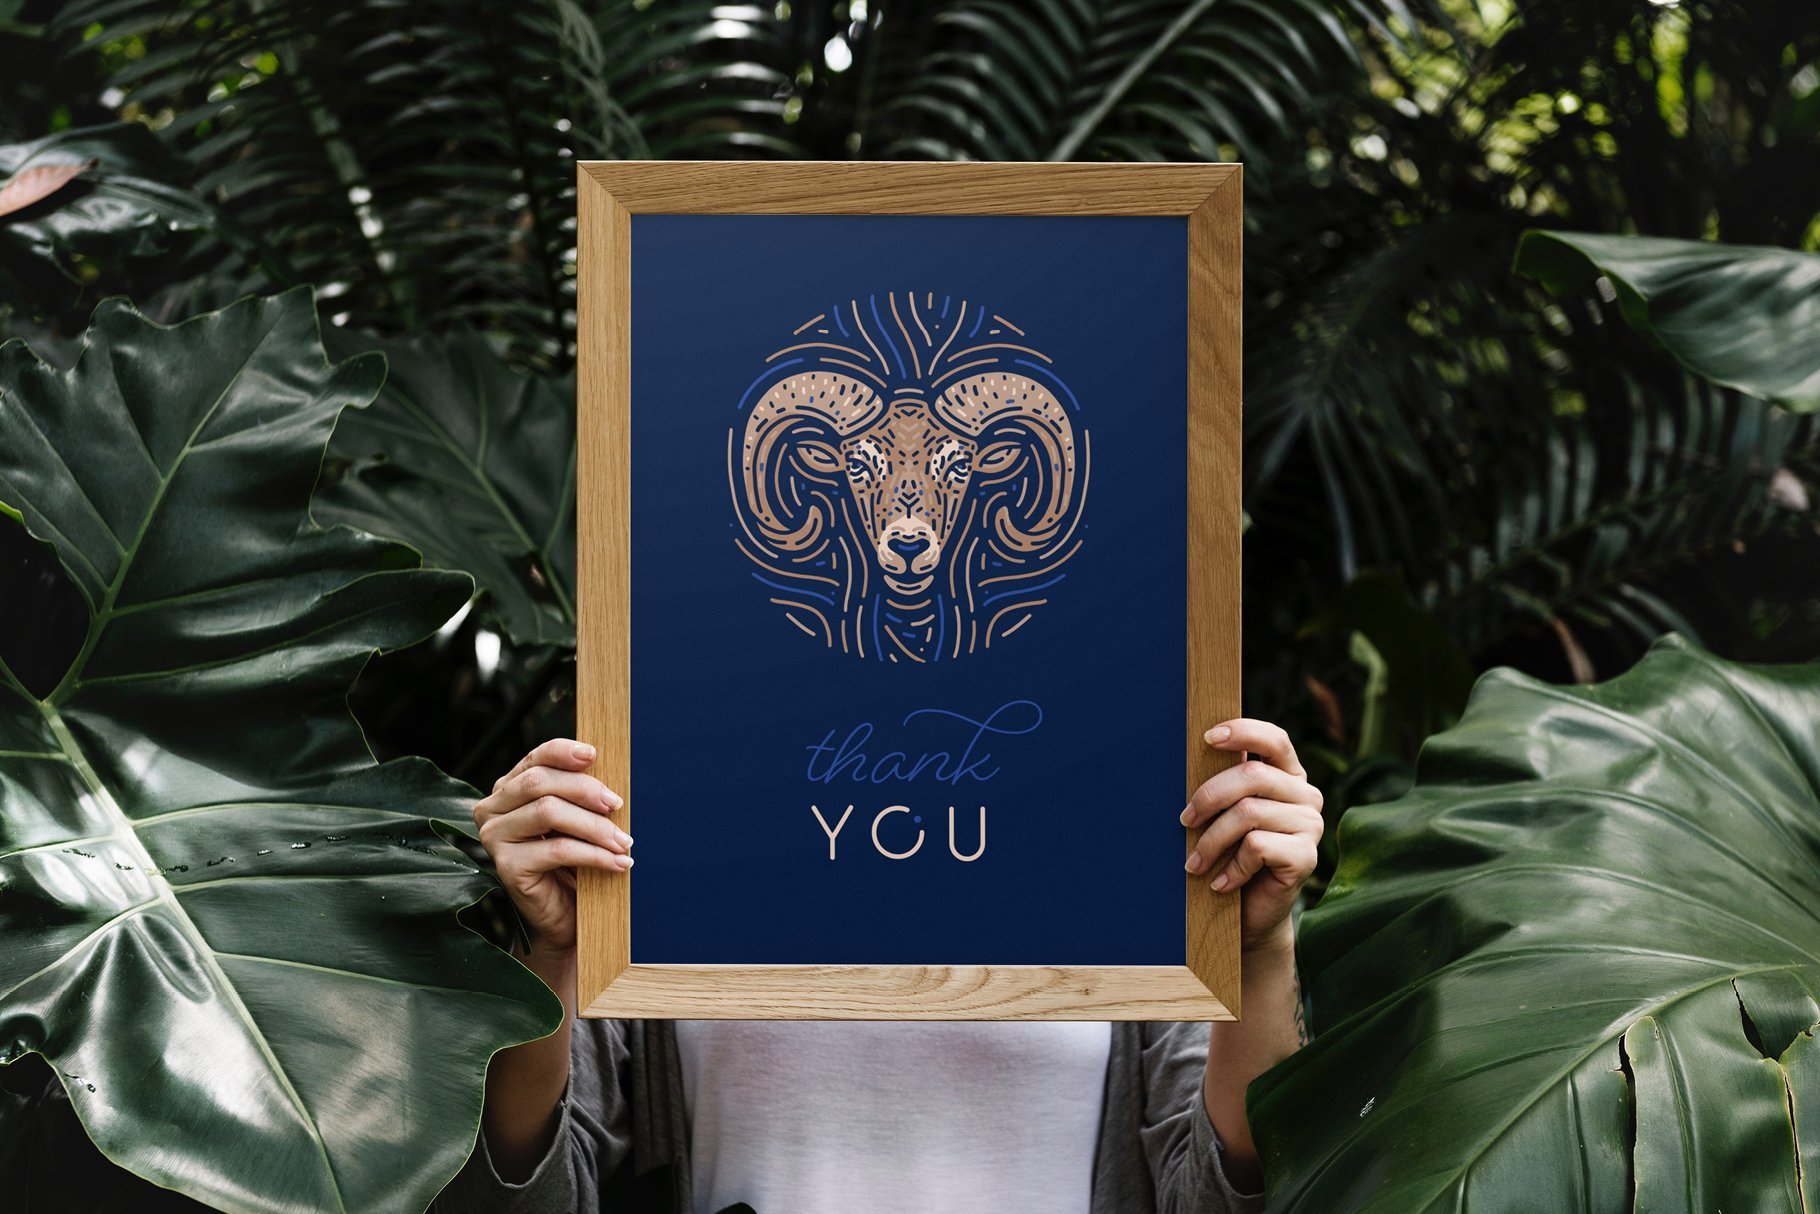 Zodiac signs thank you with aries sign in the frame.